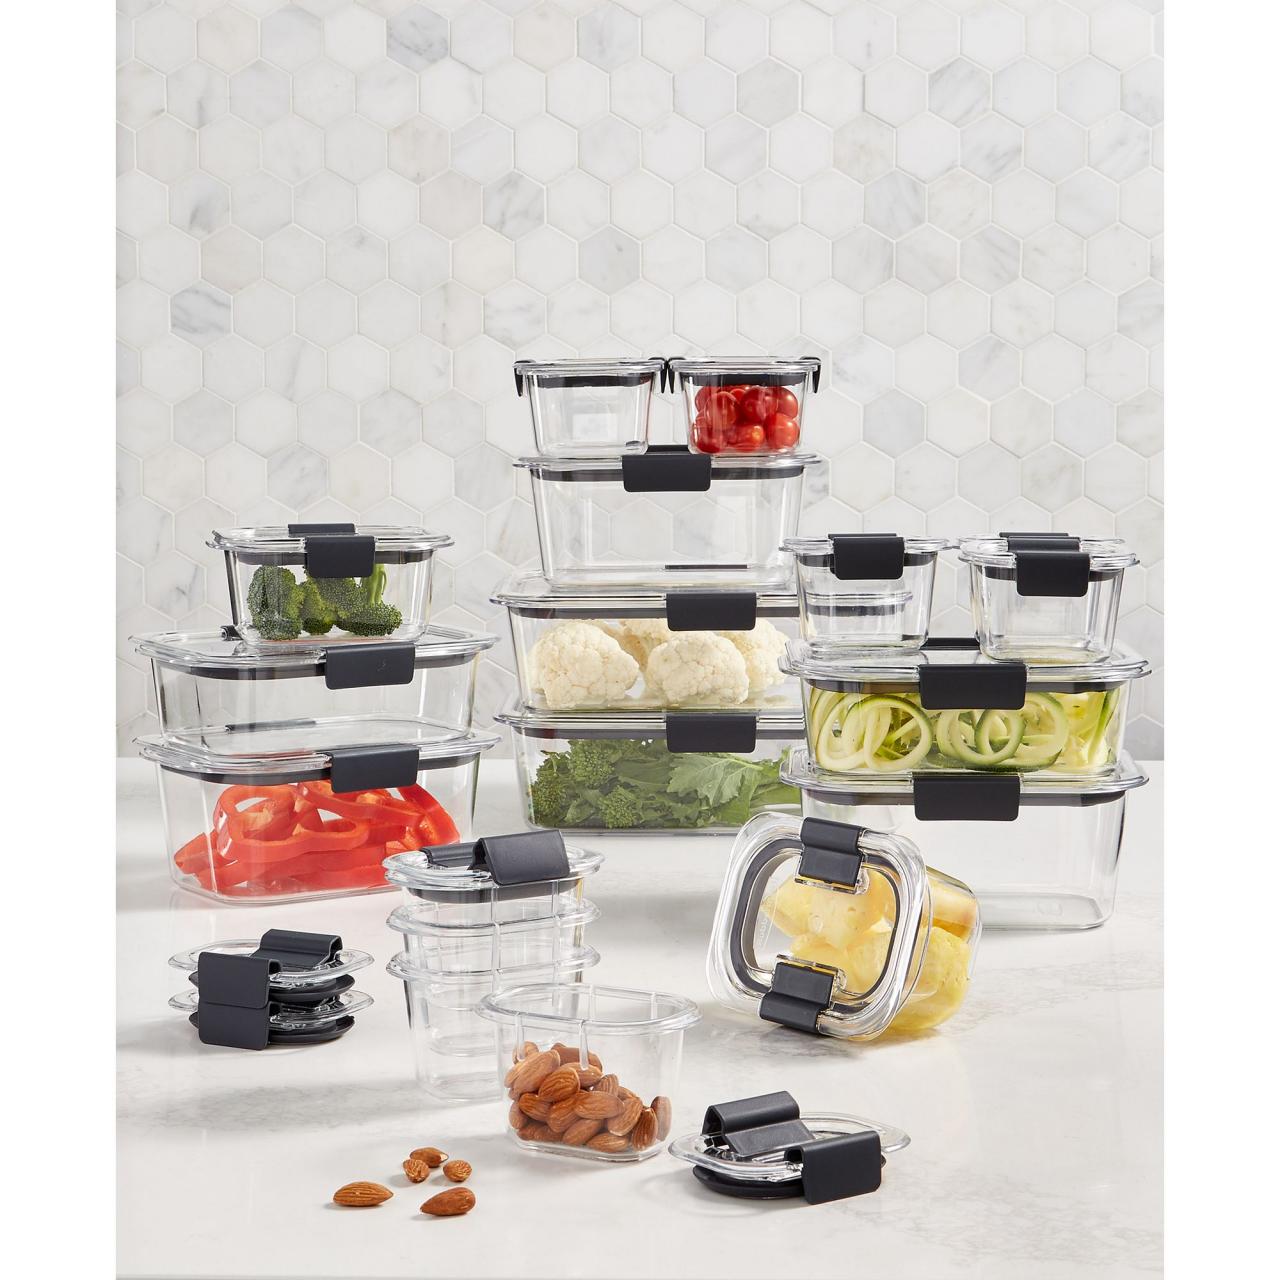 https://food.fnr.sndimg.com/content/dam/images/food/products/2019/8/23/rx_rubbermaid-brilliance-36-piece-container-set.jpeg.rend.hgtvcom.1280.1280.suffix/1566584612353.jpeg